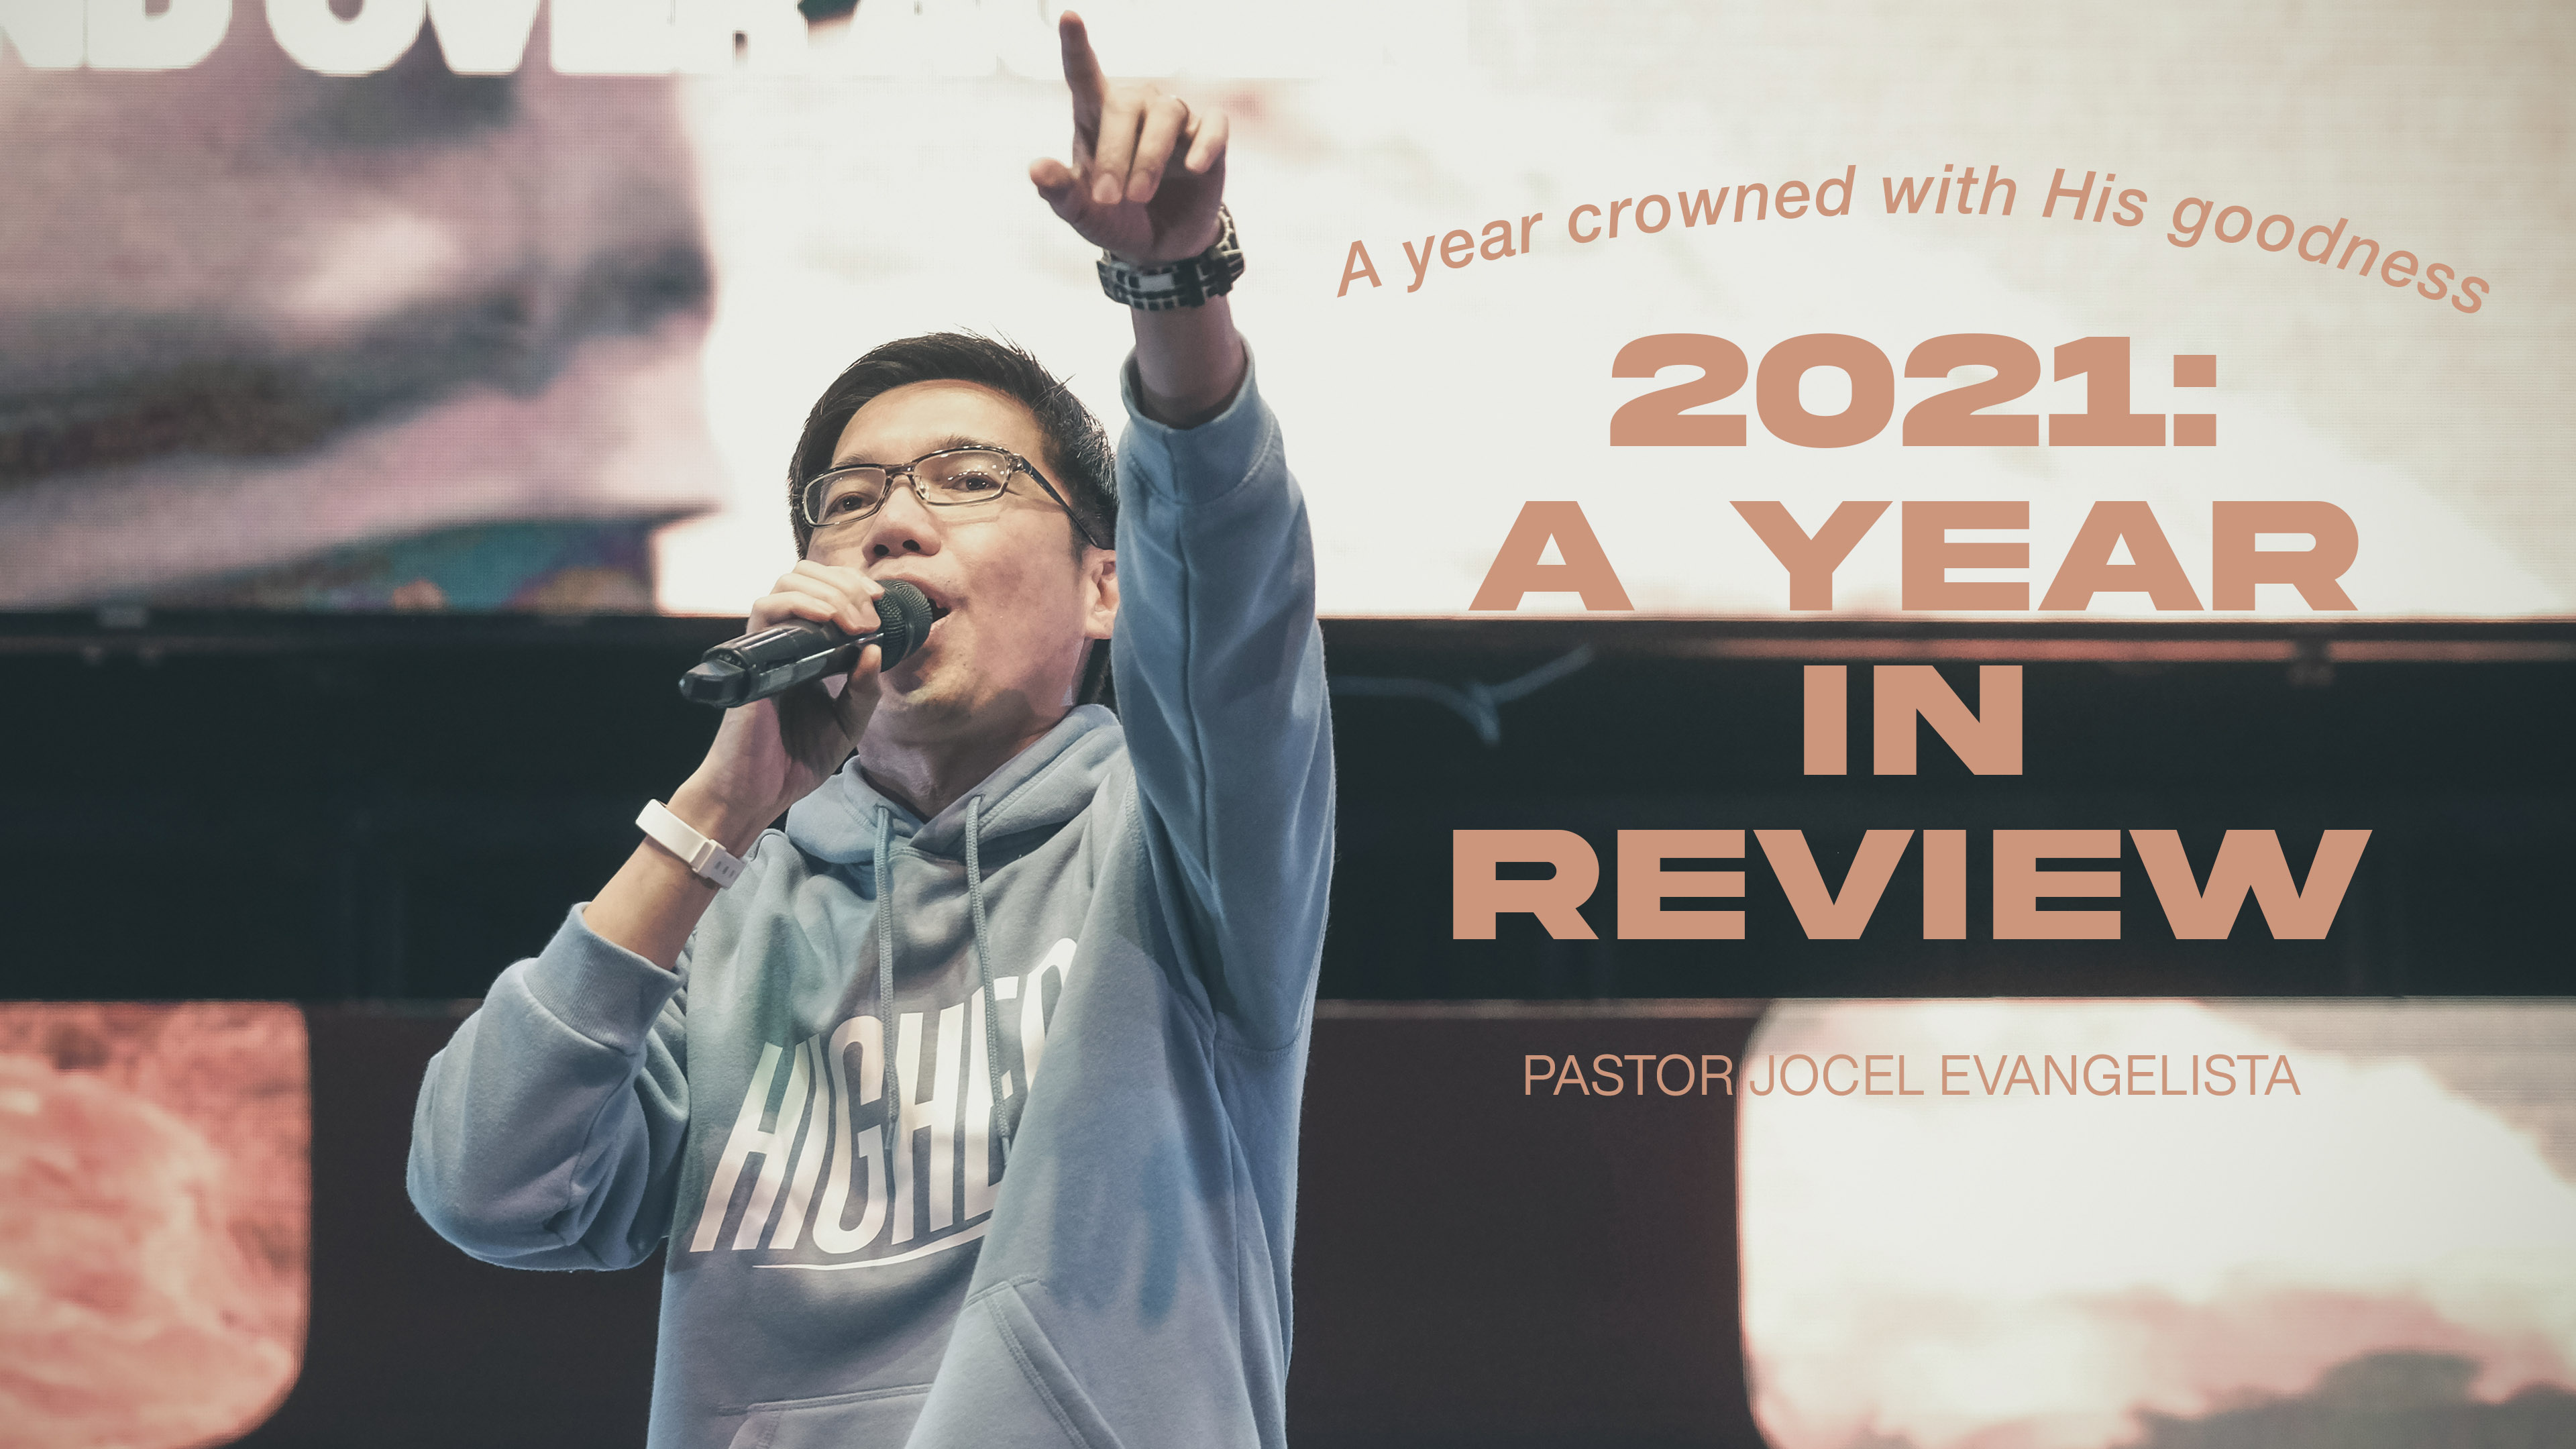 A YEAR CROWNED WITH HIS GOODNESS 2021: A YEAR IN REVIEW